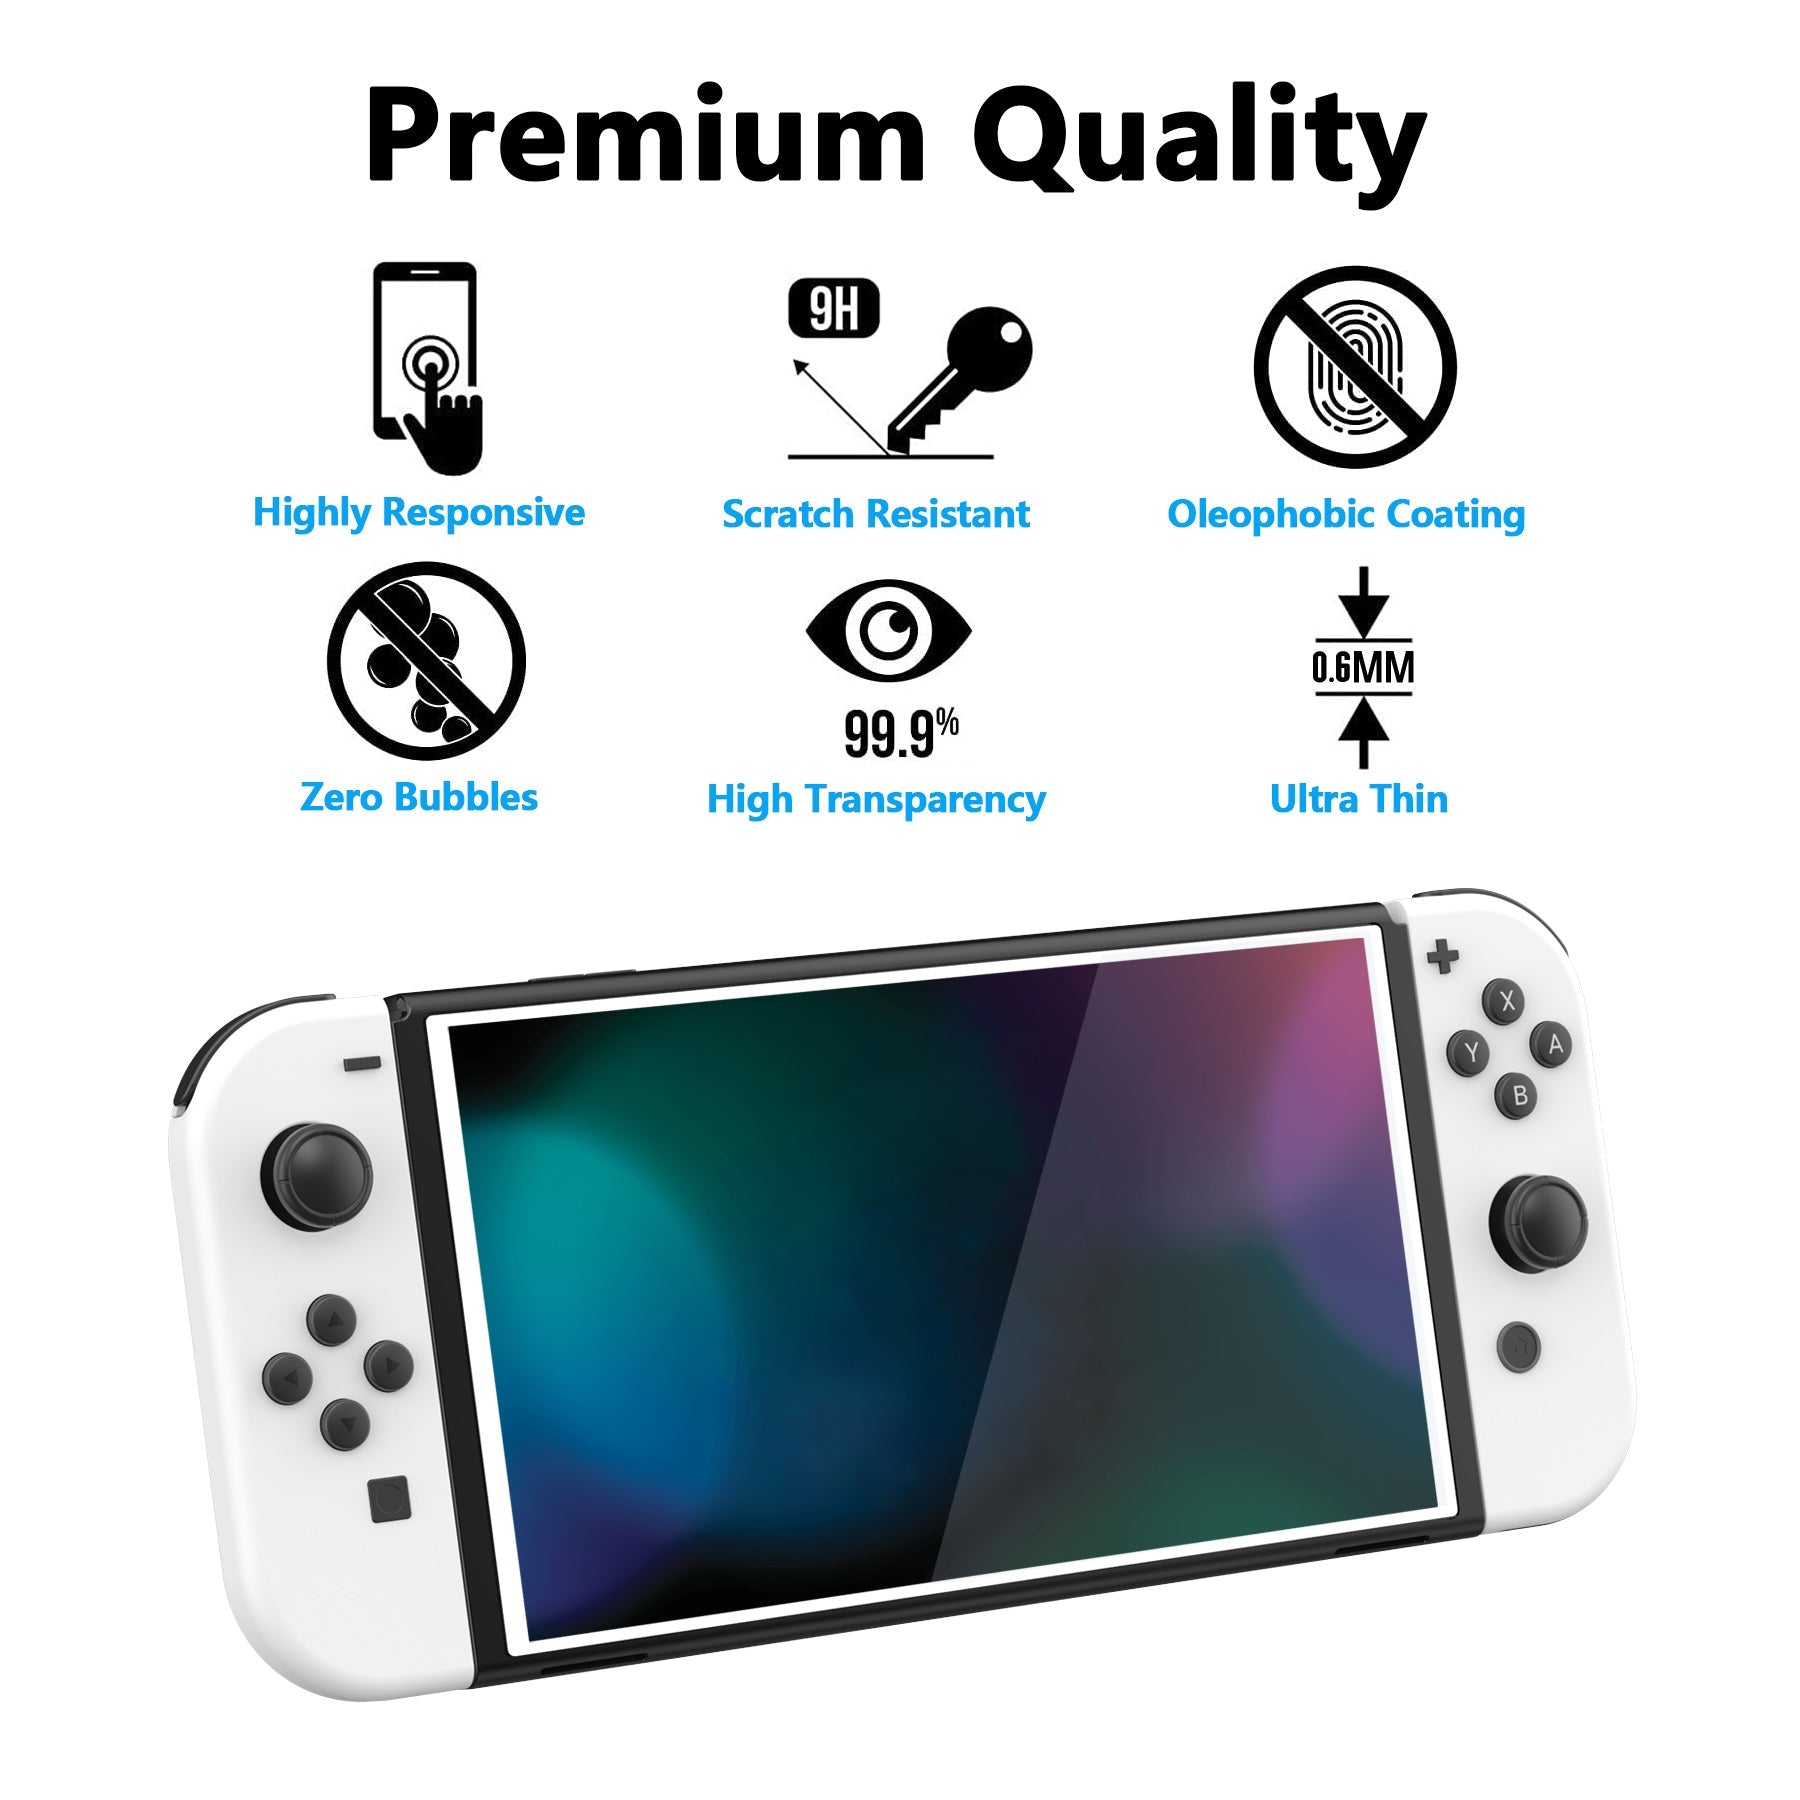 PlayVital White Border Tempered Glass Screen Protector for NS Switch OLED, Anti-Scratch Bubble Free Transparent HD Clear Protector Film for Switch OLED - 2 Pack Included - NTA8005 PlayVital